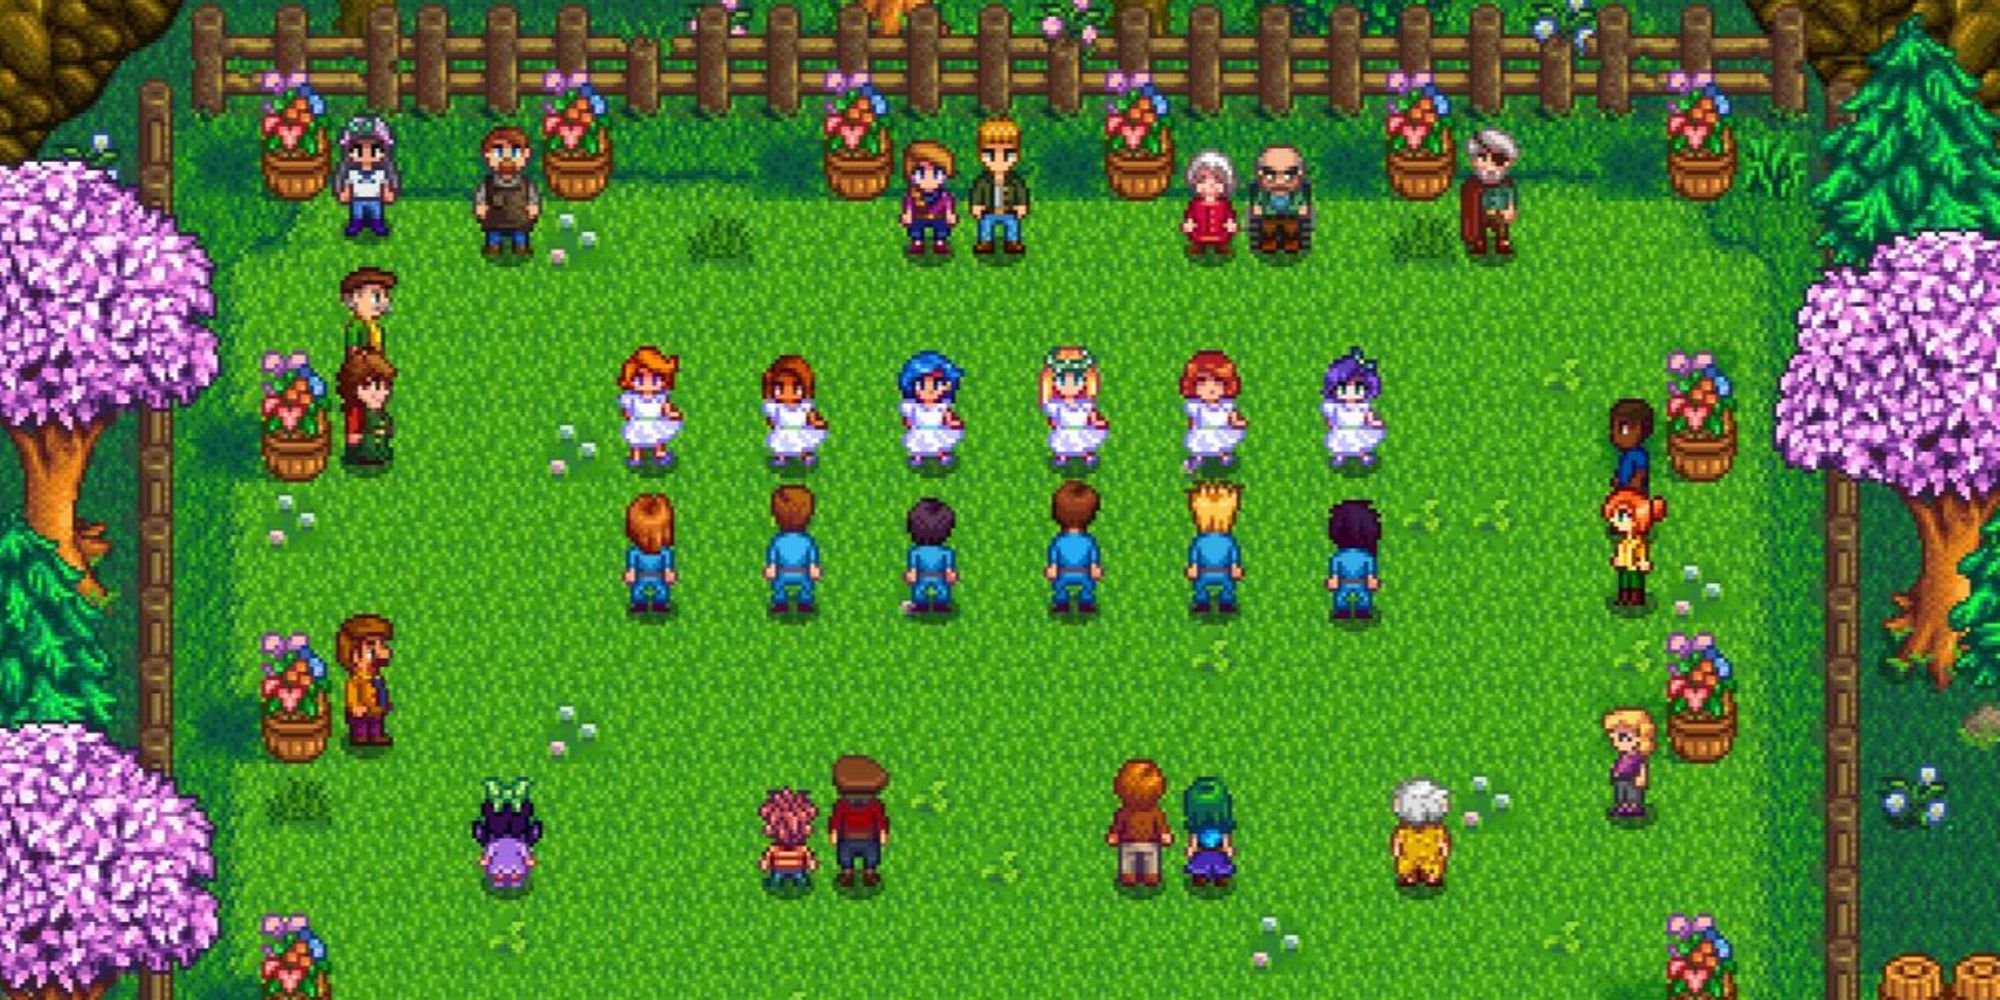 Stardew Valley Flower Dance Festival, women in white dresses and men in suits preparing to do a dance